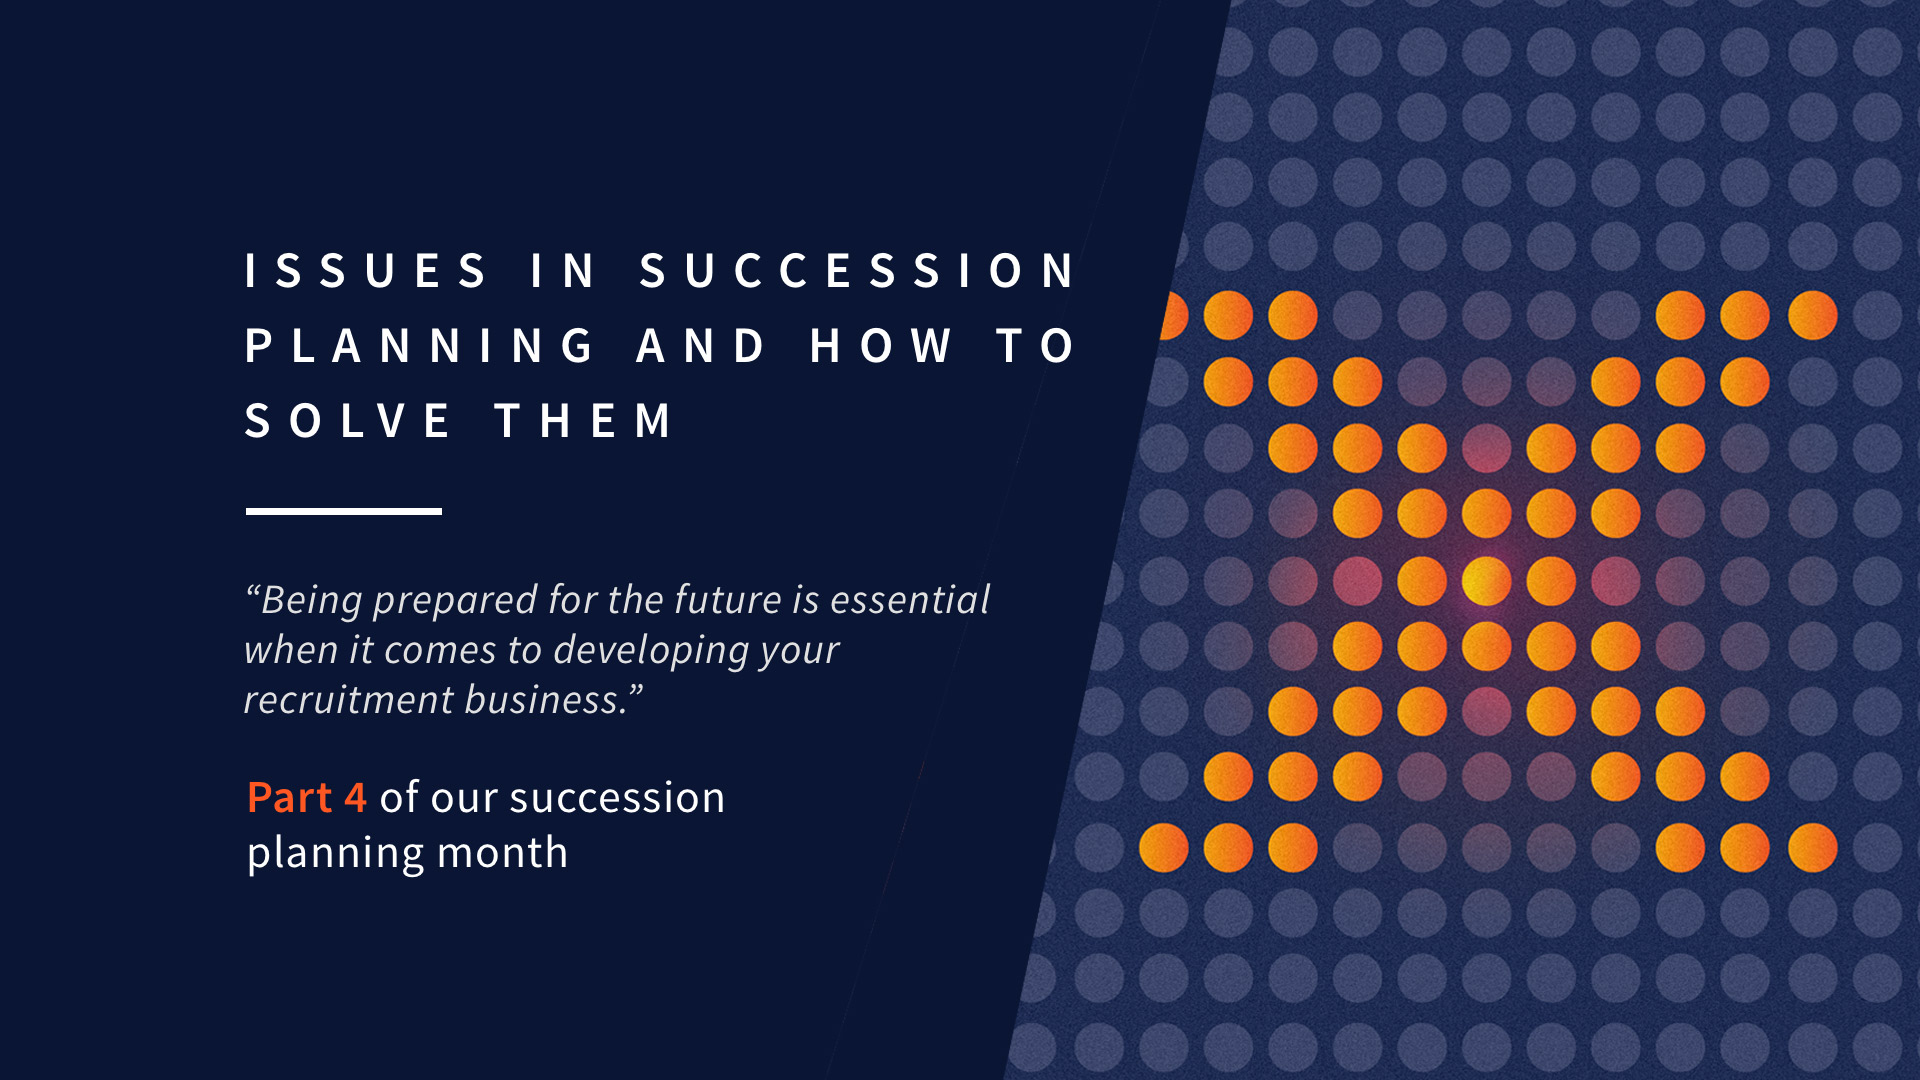 Issues in Succession Planning and how to solve them